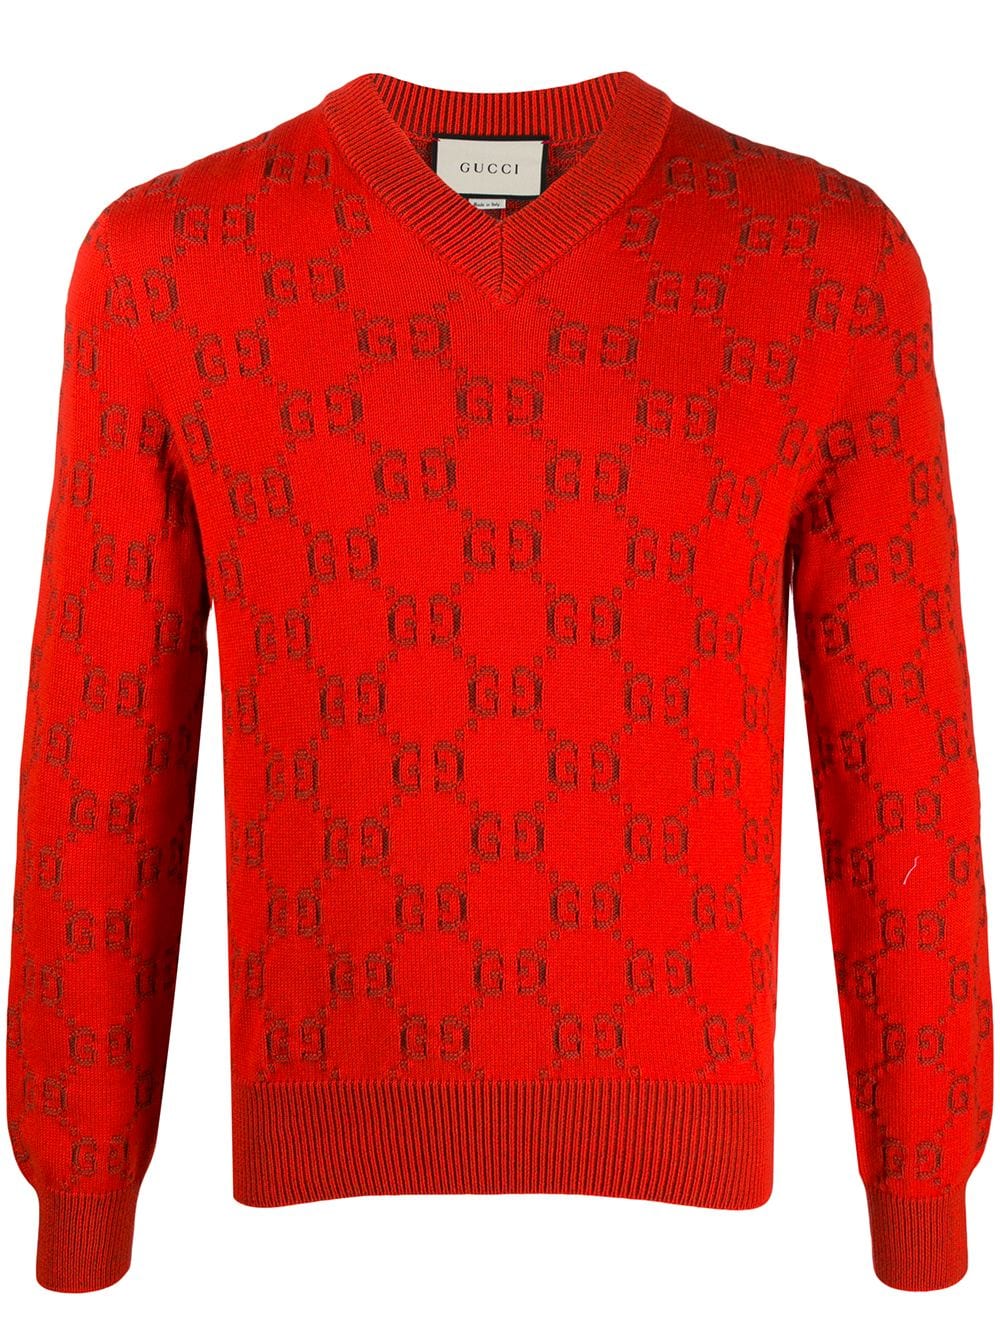 Gucci Gg Embroidered Jumper In Red